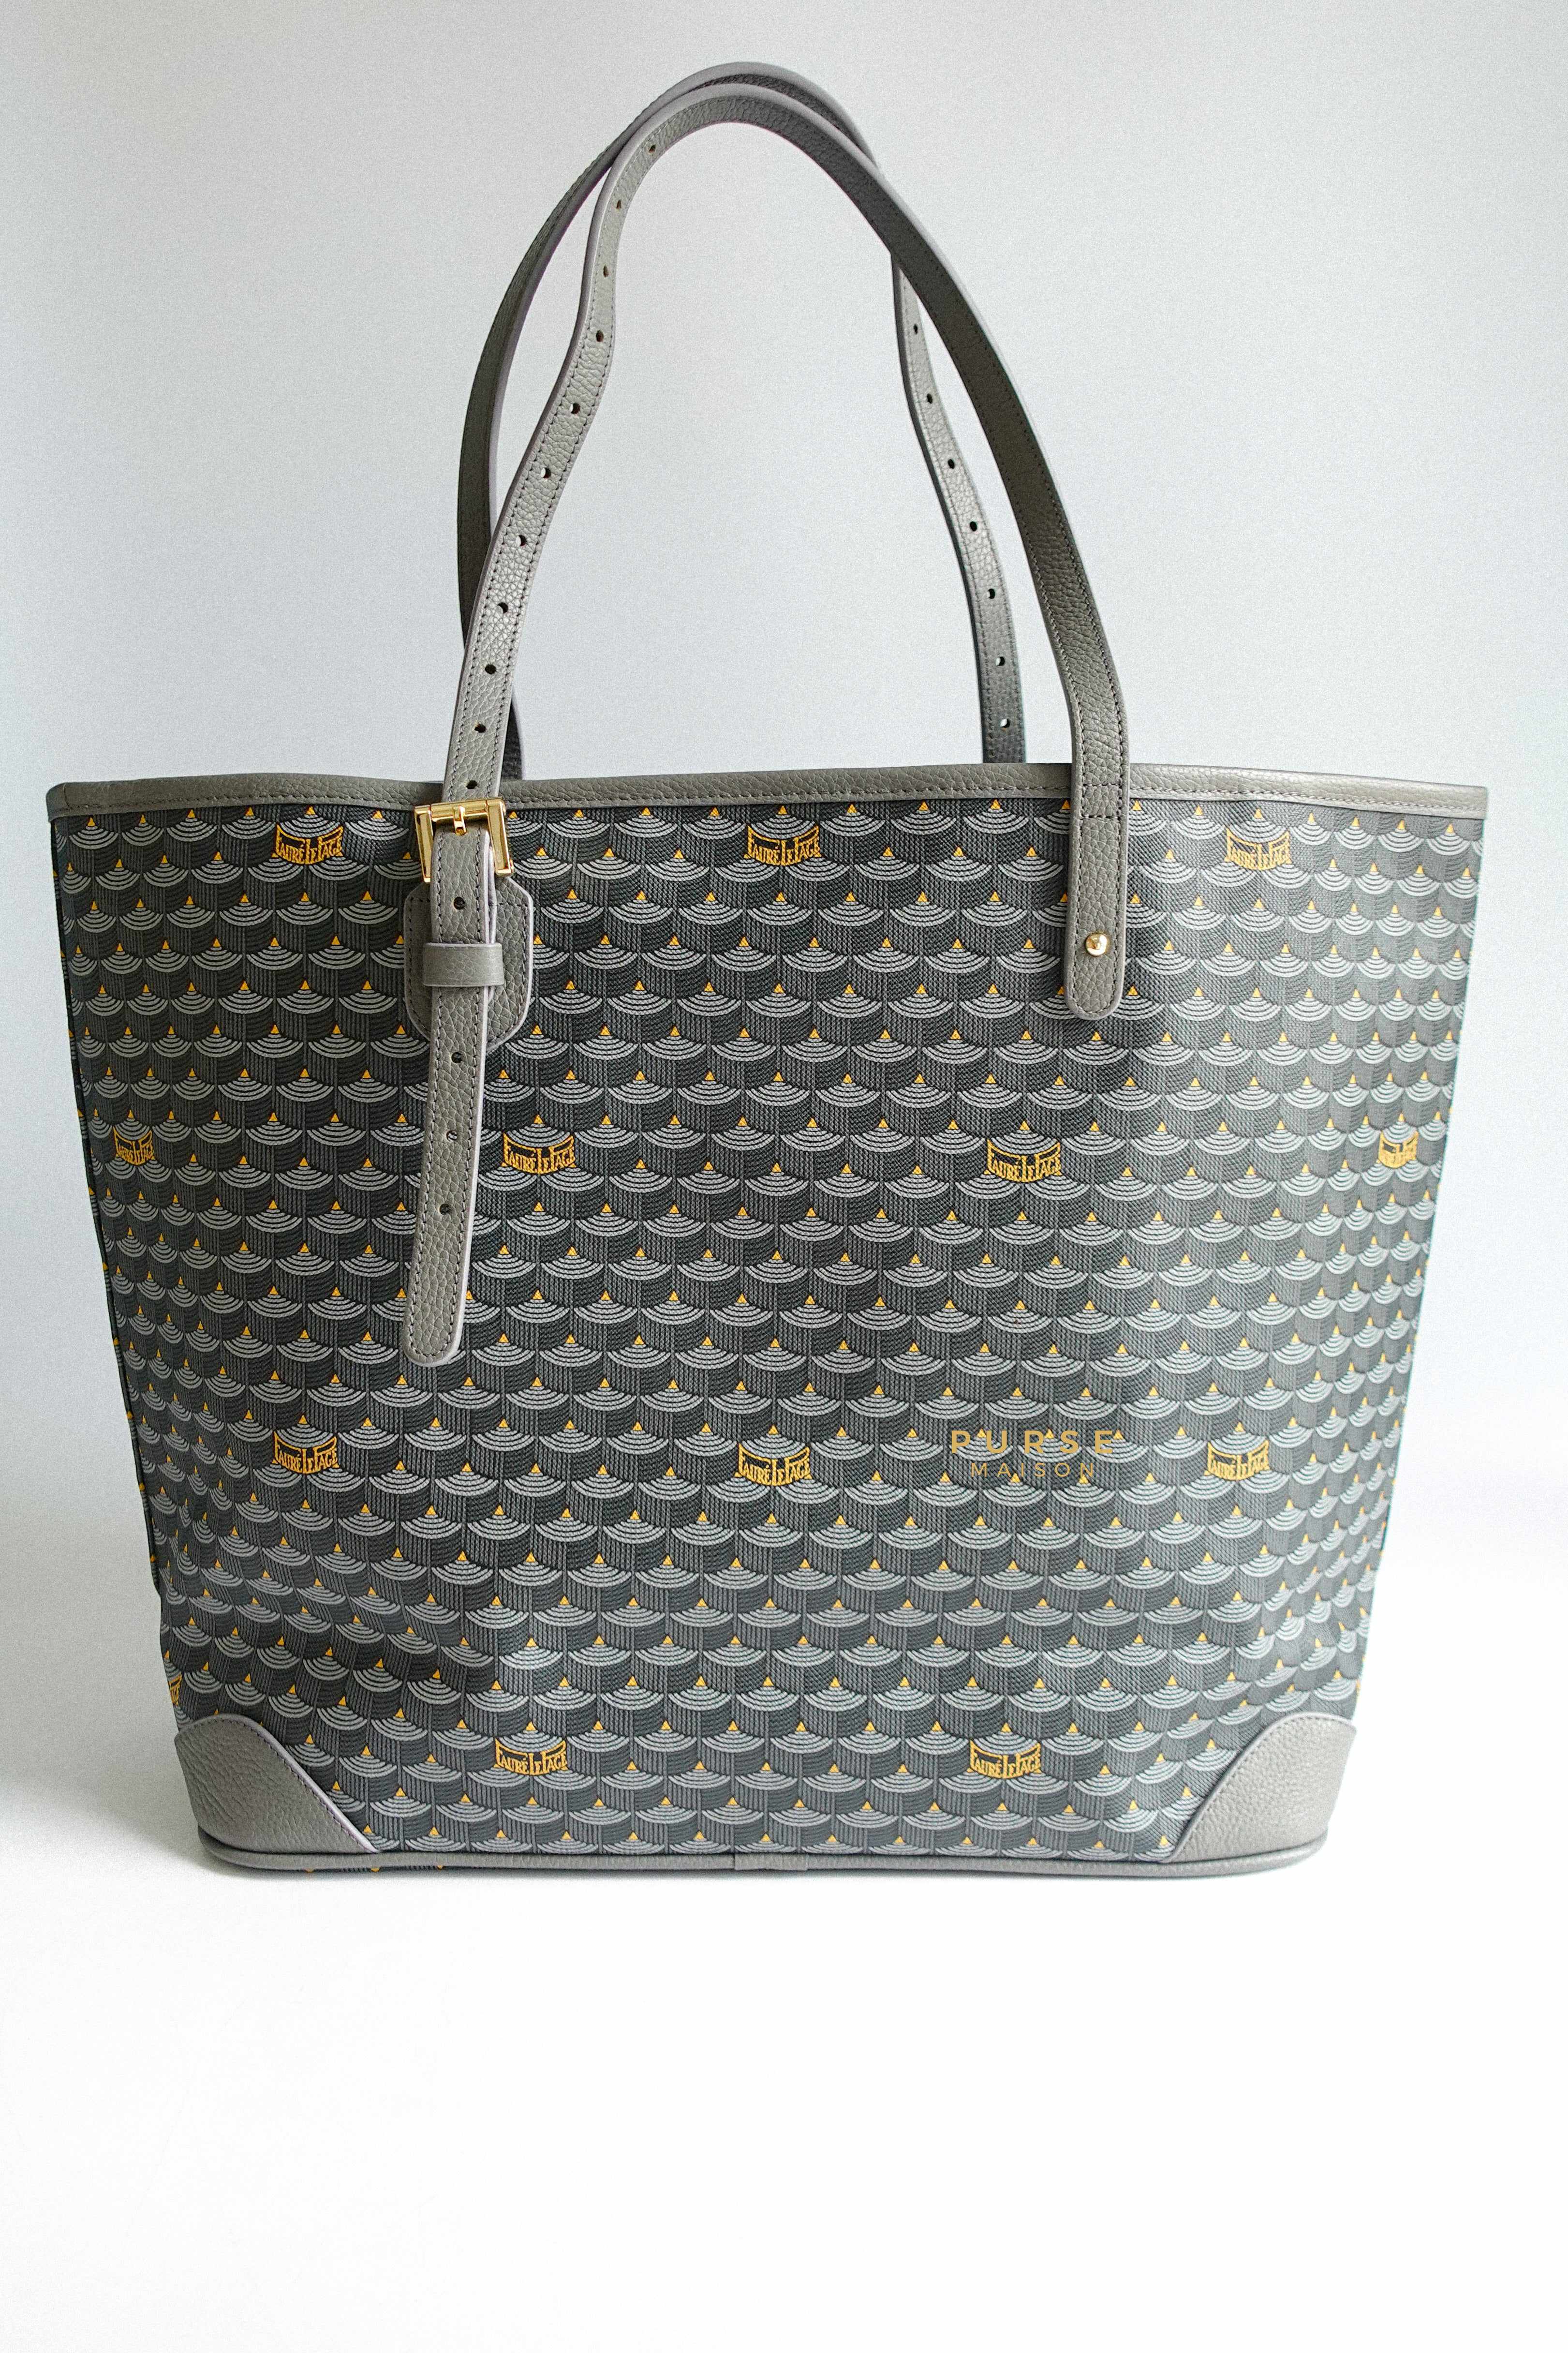 Fauré Le Page Daily Battle 35 Tote in Gray